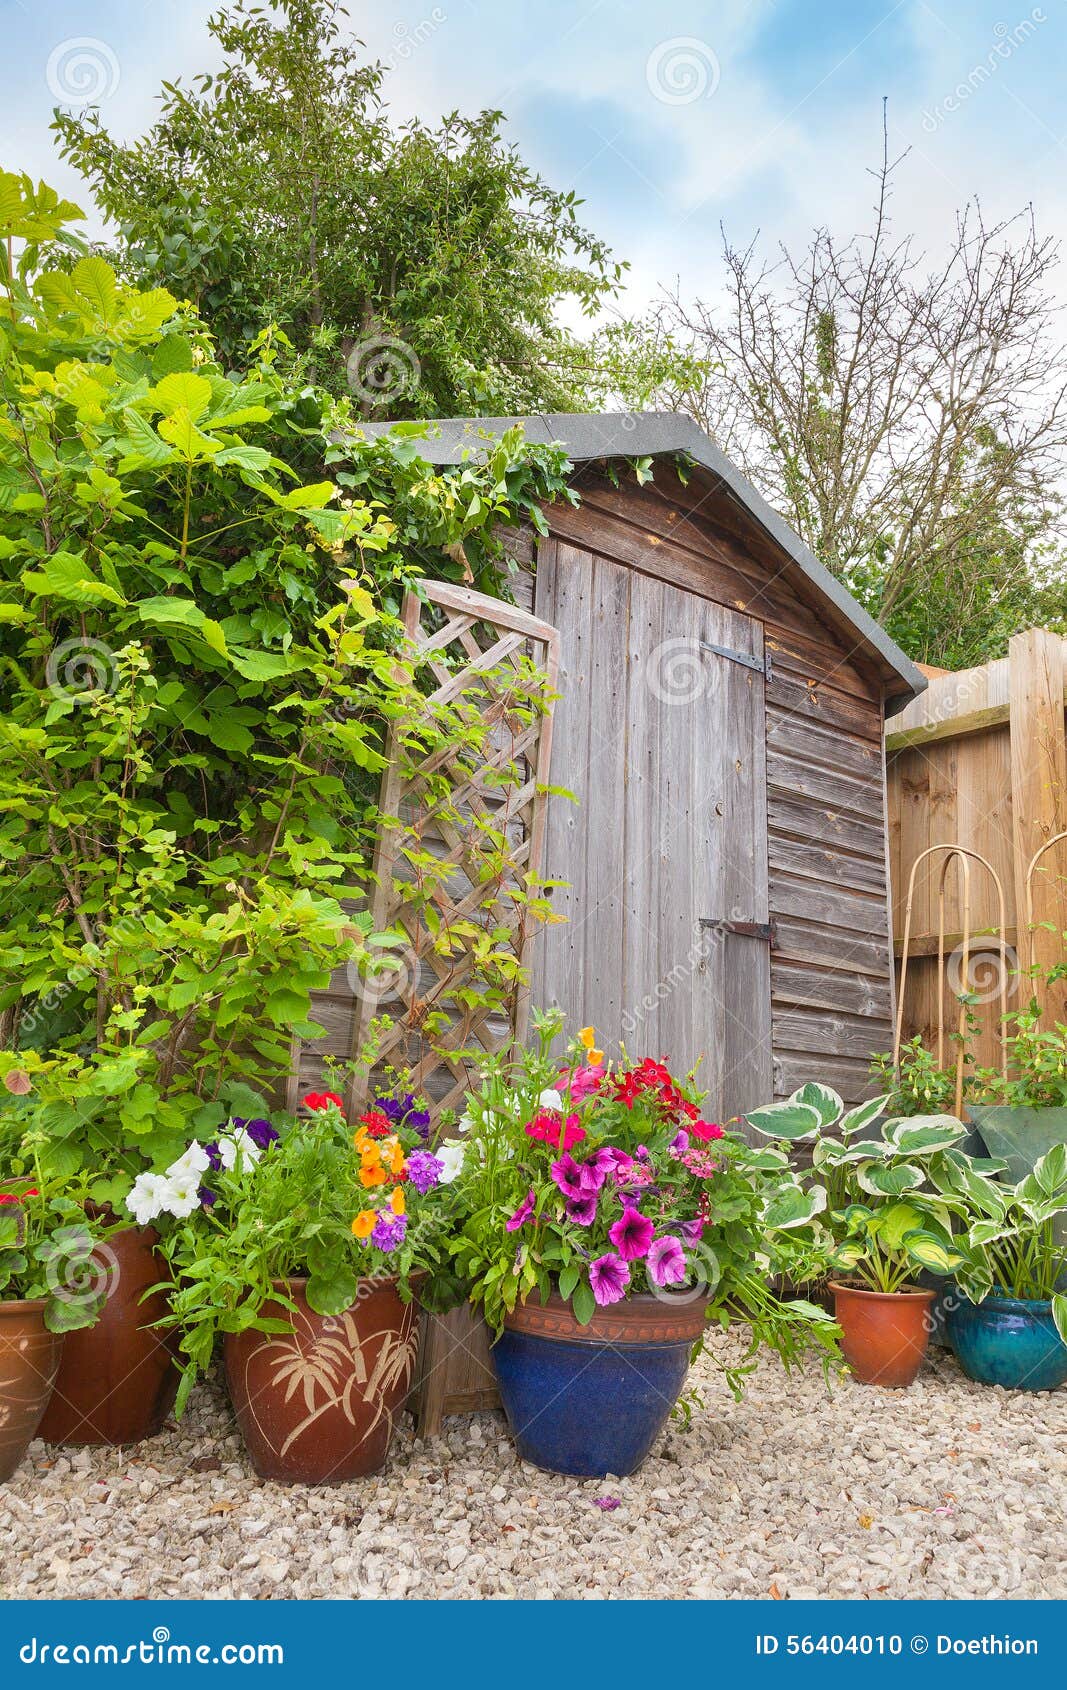 Colorful Potted Plants Hiding A Garden Shed. Stock Photo ...